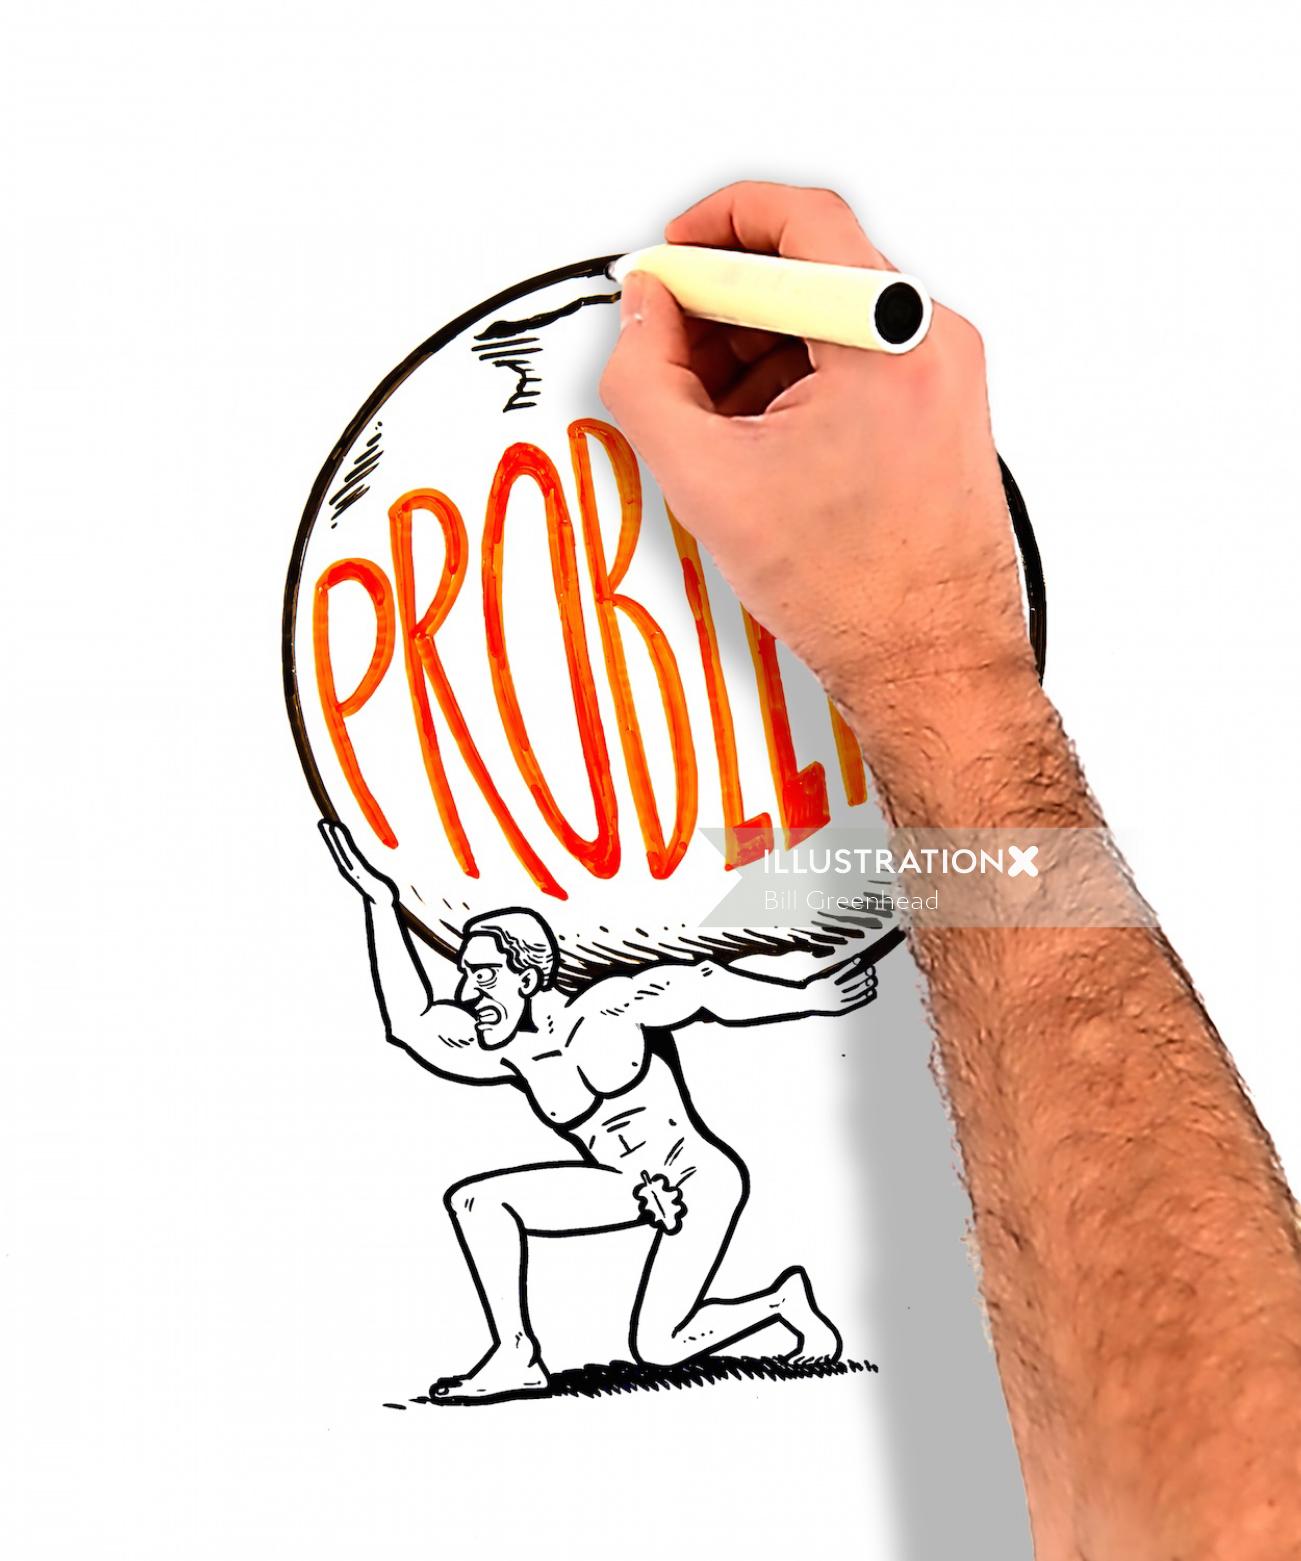 Problem concept- Man holiding huge stone Live drawing illustration by Bill Greenhead